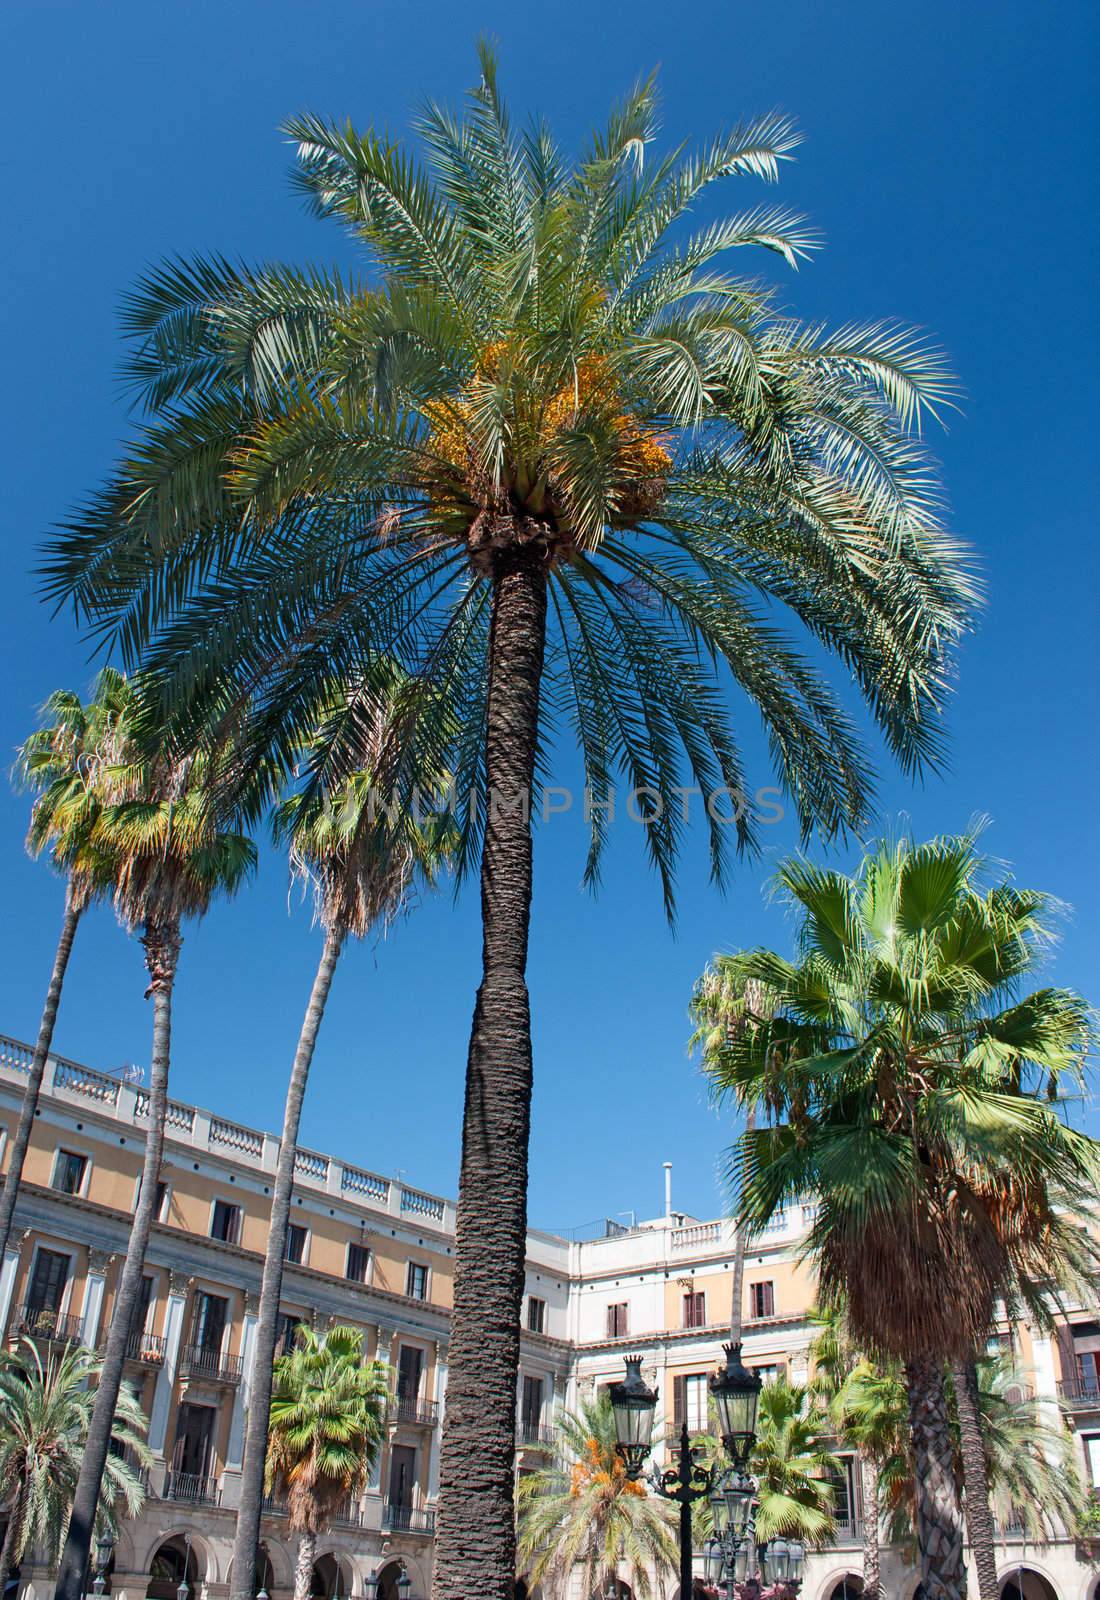 The Plaza Reial (place of kings) in Barcelona - Europe